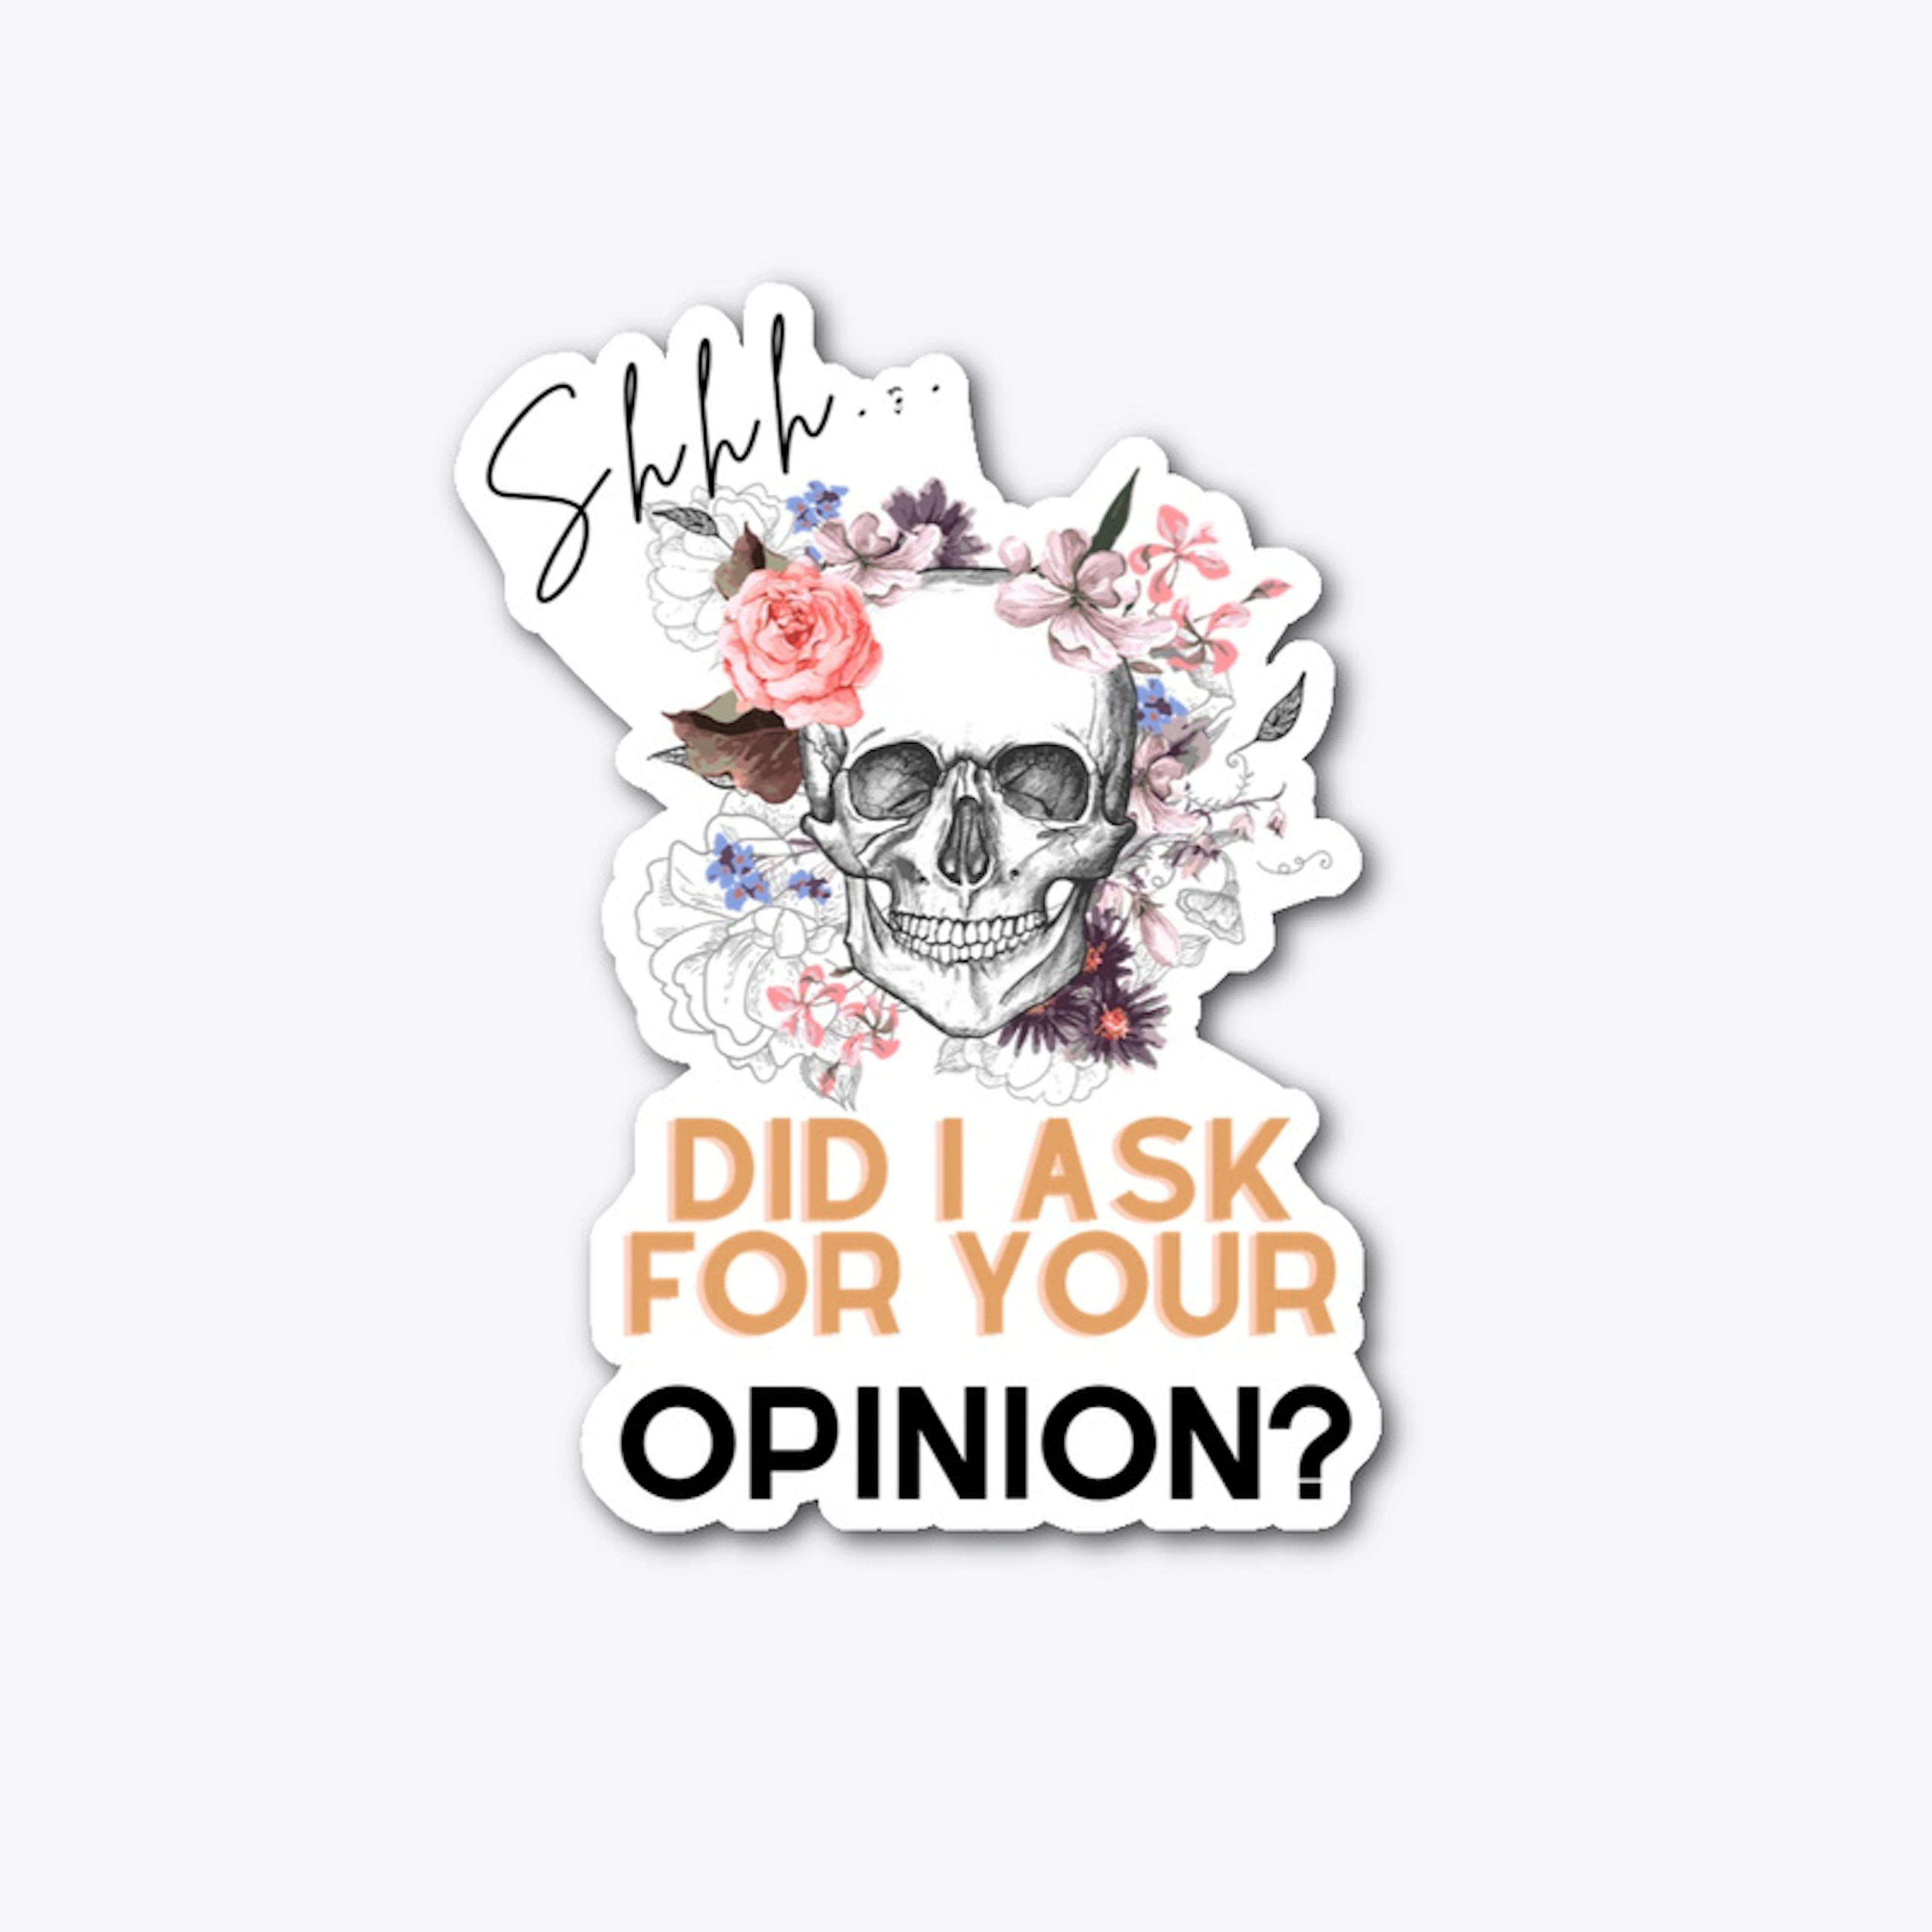 Did I ask for your opinion?